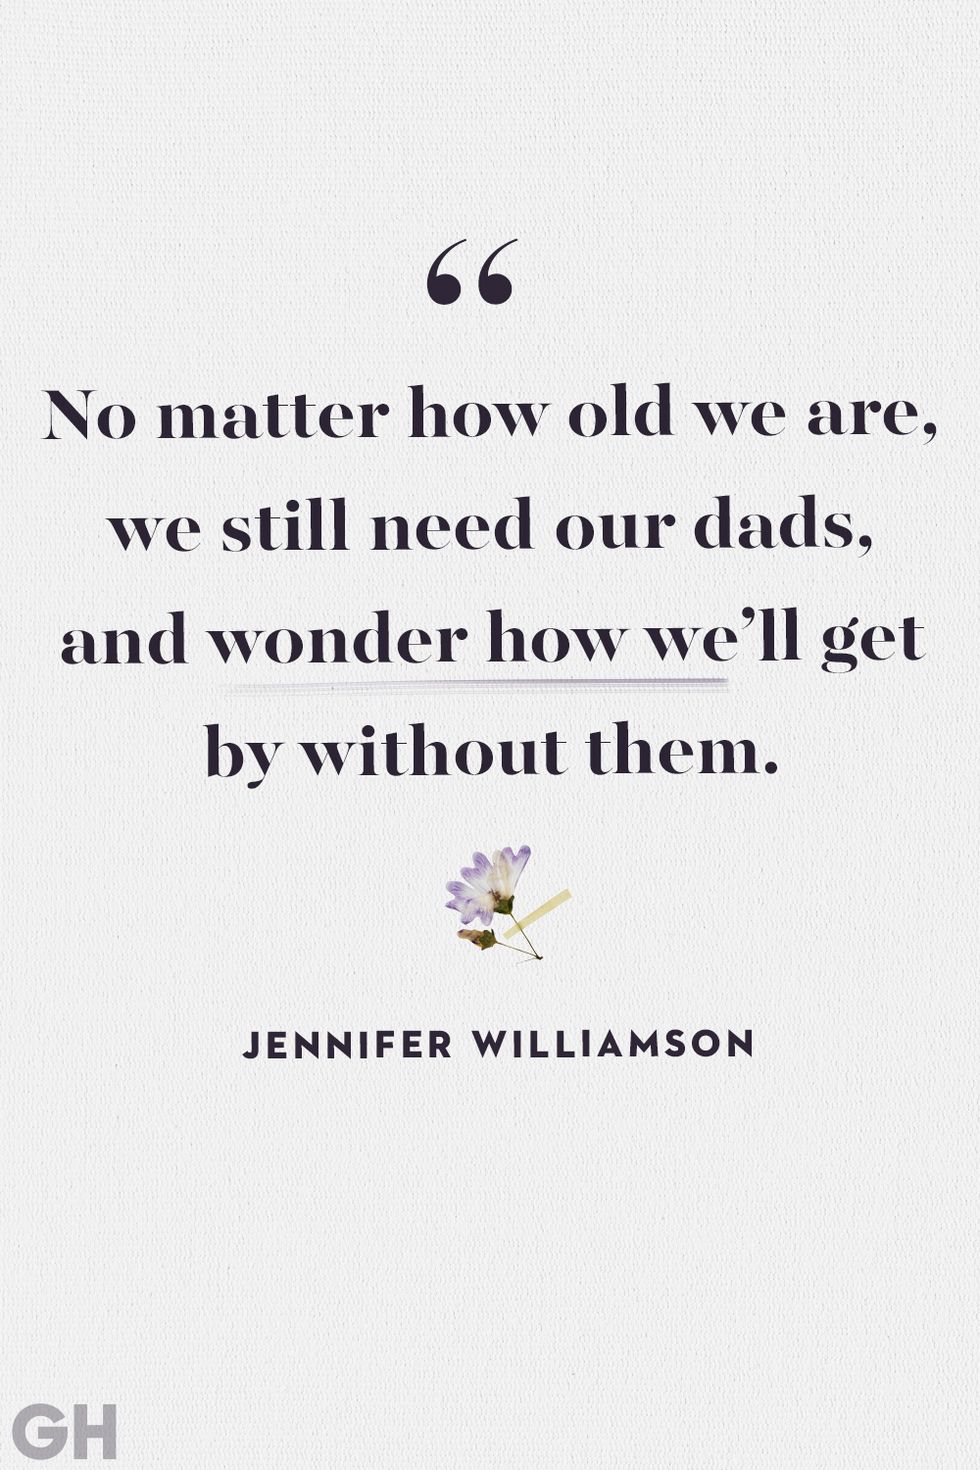 black text on grey background with purple flower reading no matter how old we are we still need our dads and wonder how we'll get by without them by jennifer williamson